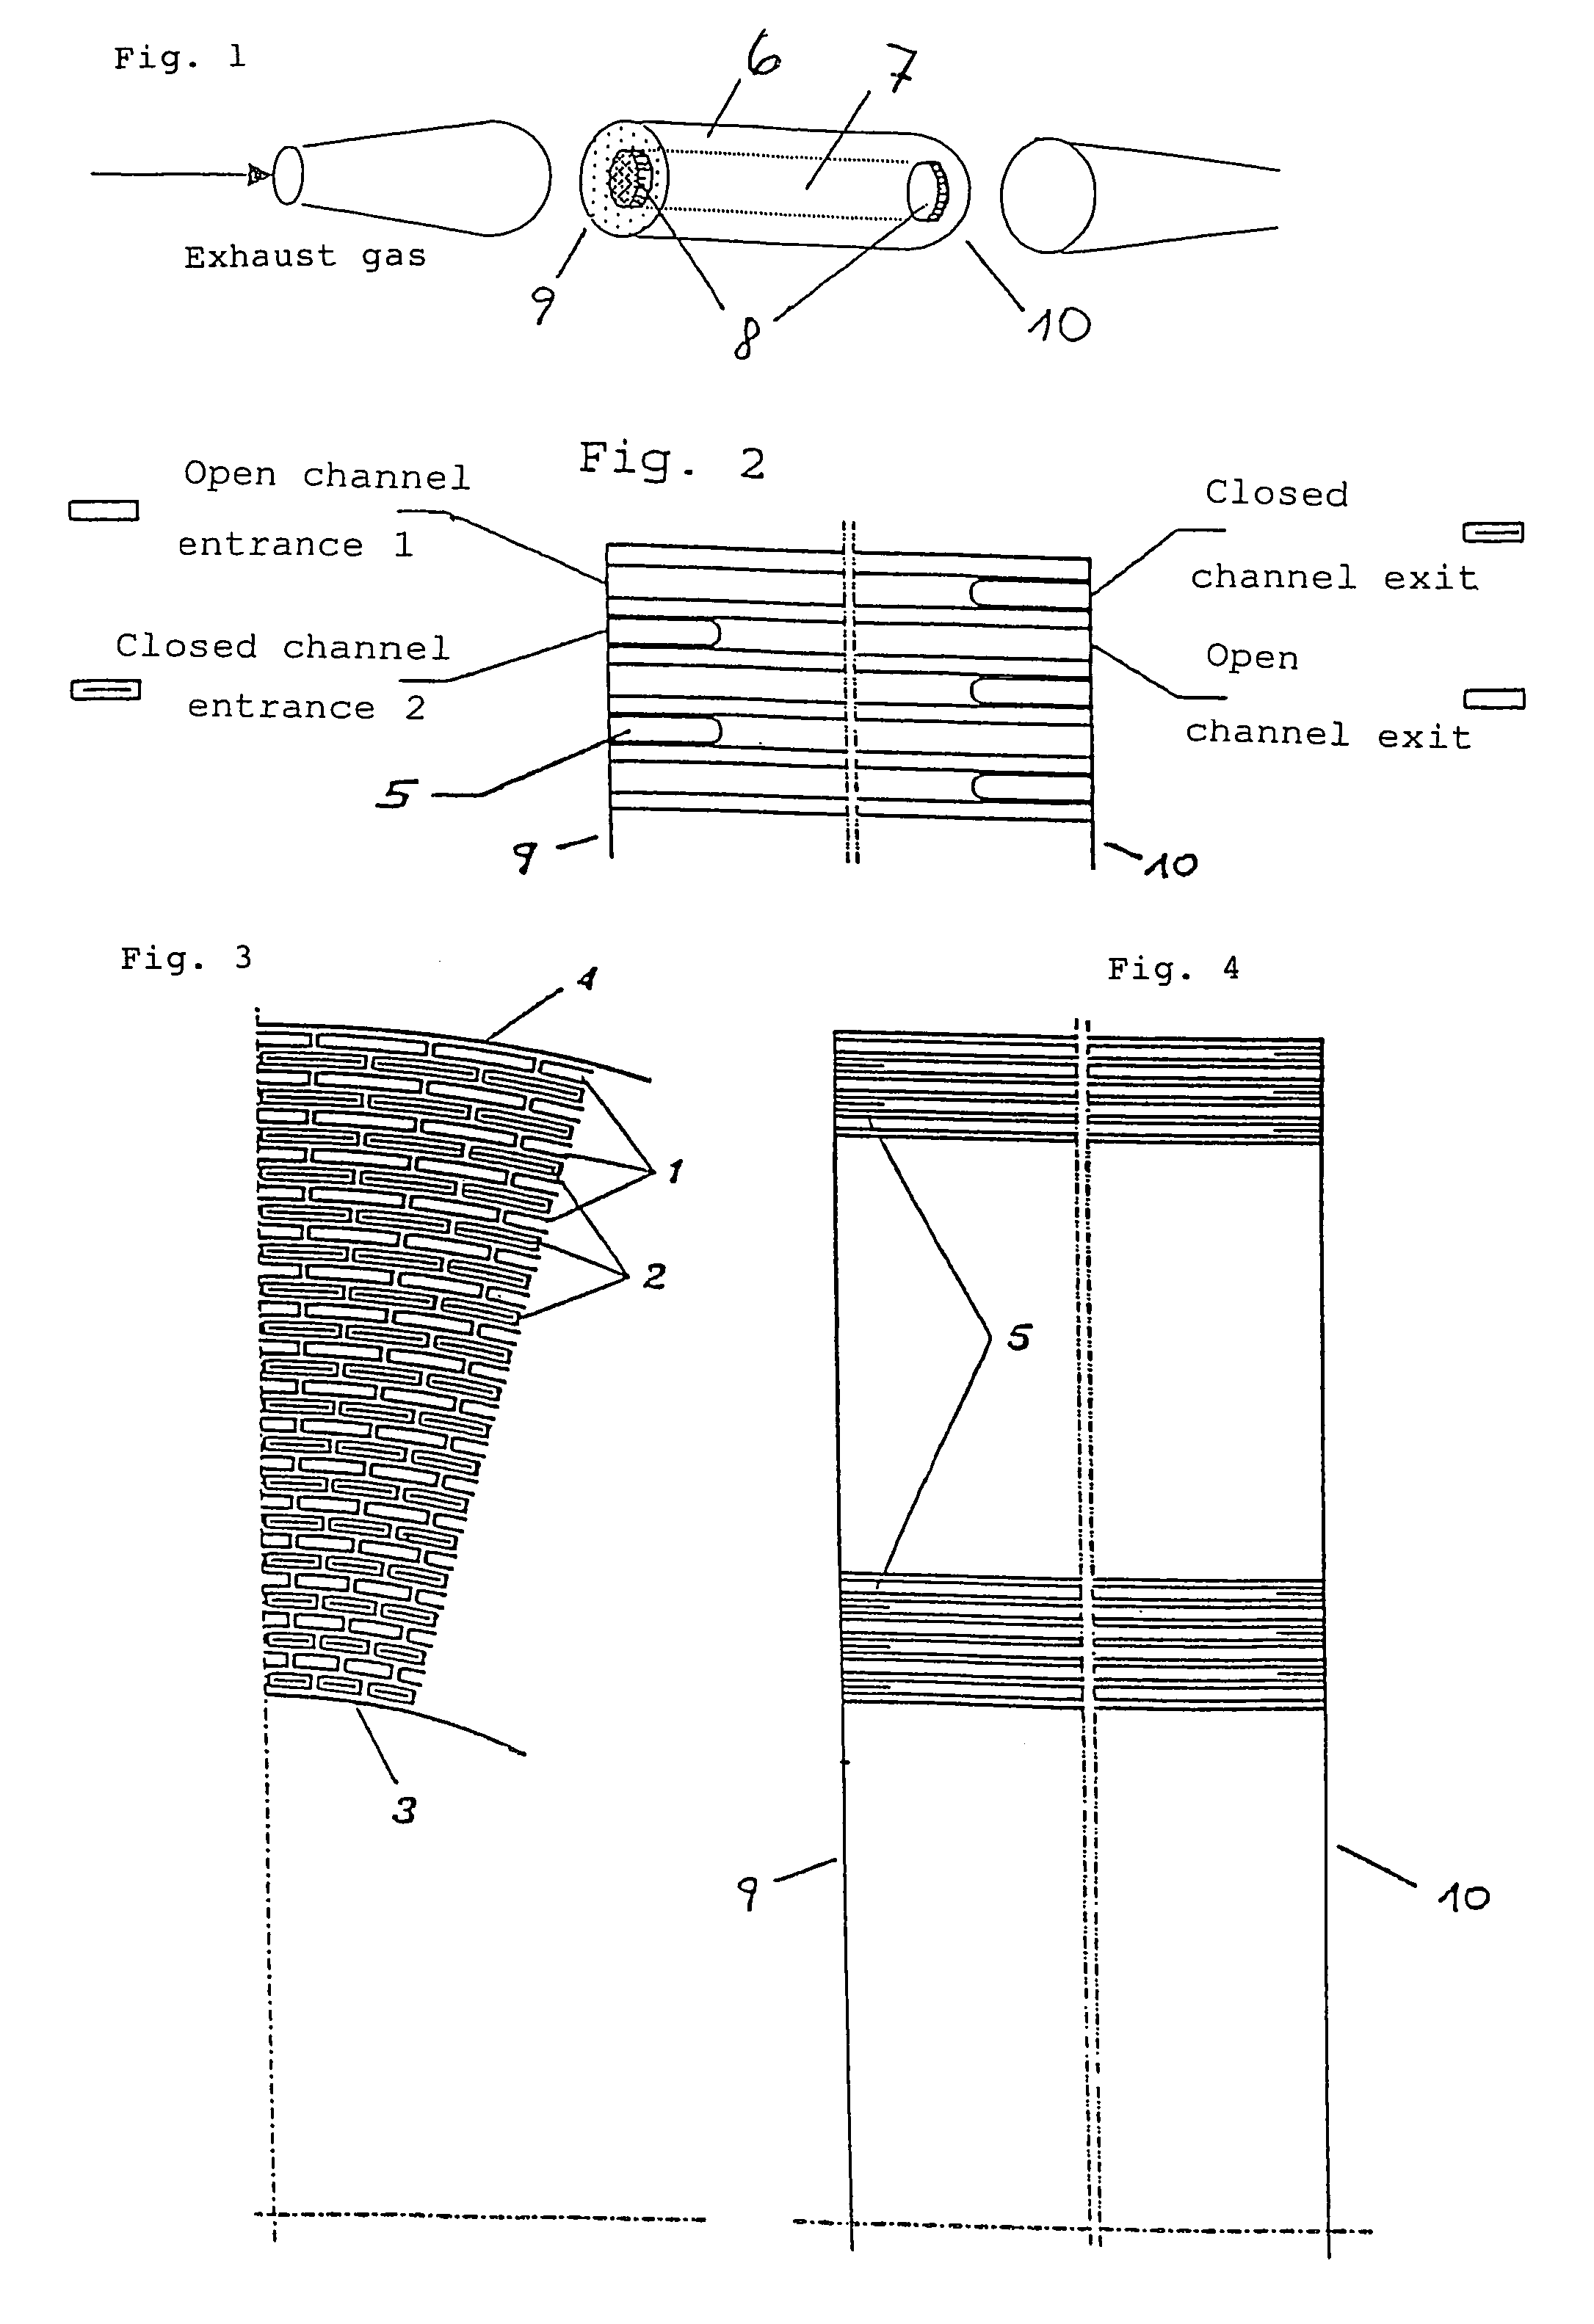 Filter system for spreading soot particles from a stream of exhaust gas